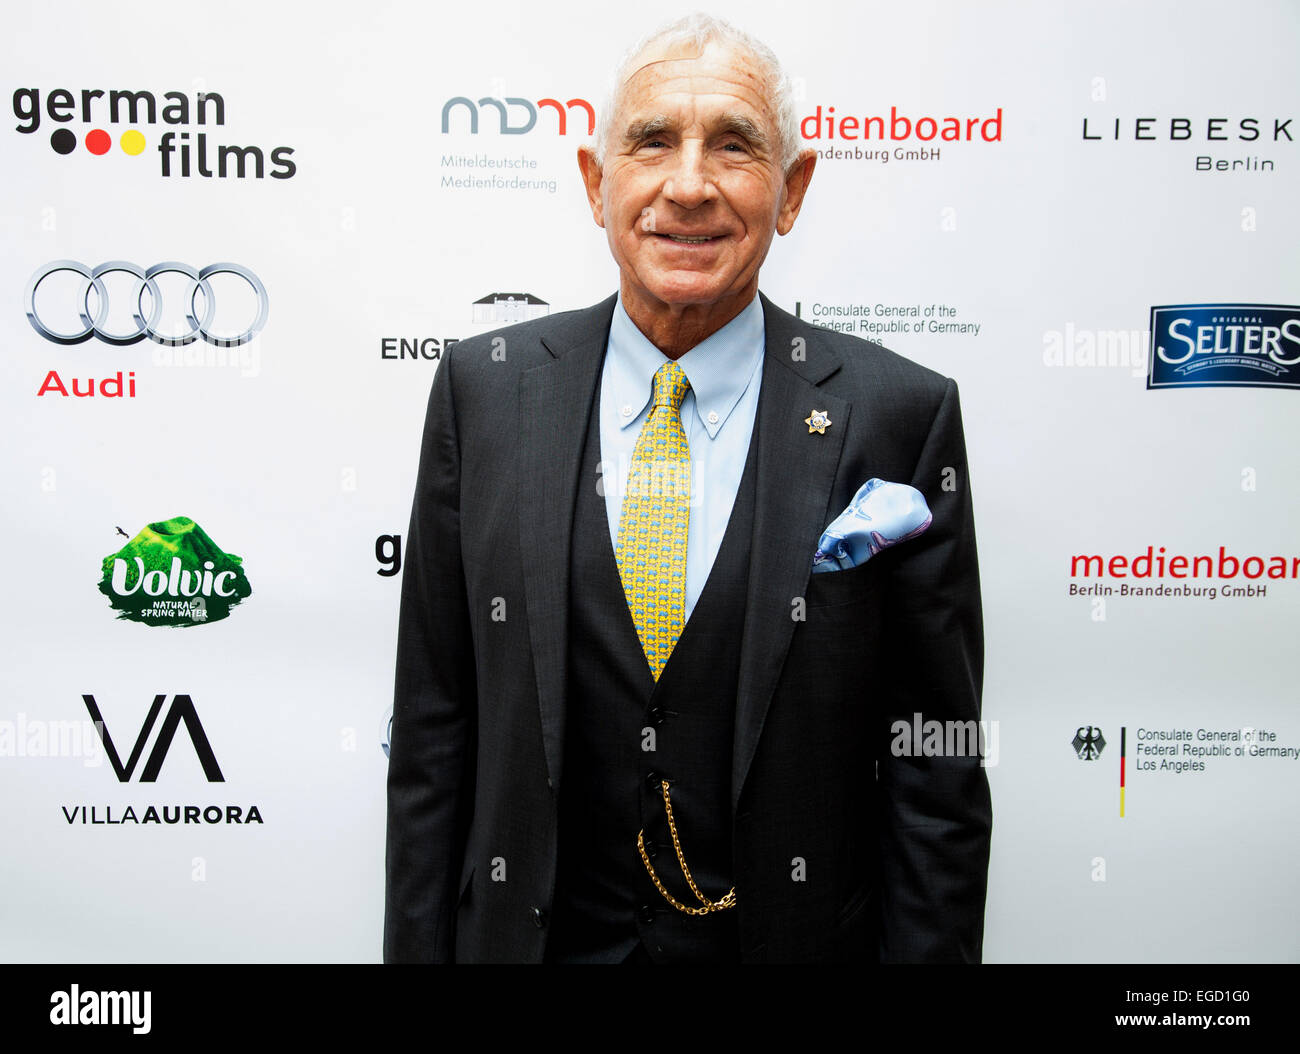 Frdric Prinz von Anhalt at the German Films and the Consulate General of the Federal Republic Of Germany's German Oscar nominees reception held at Villa Aurora in Pacific Palisades on February 21, 2015. Credit: Flaminia Fanale/Lumeimages.com Stock Photo